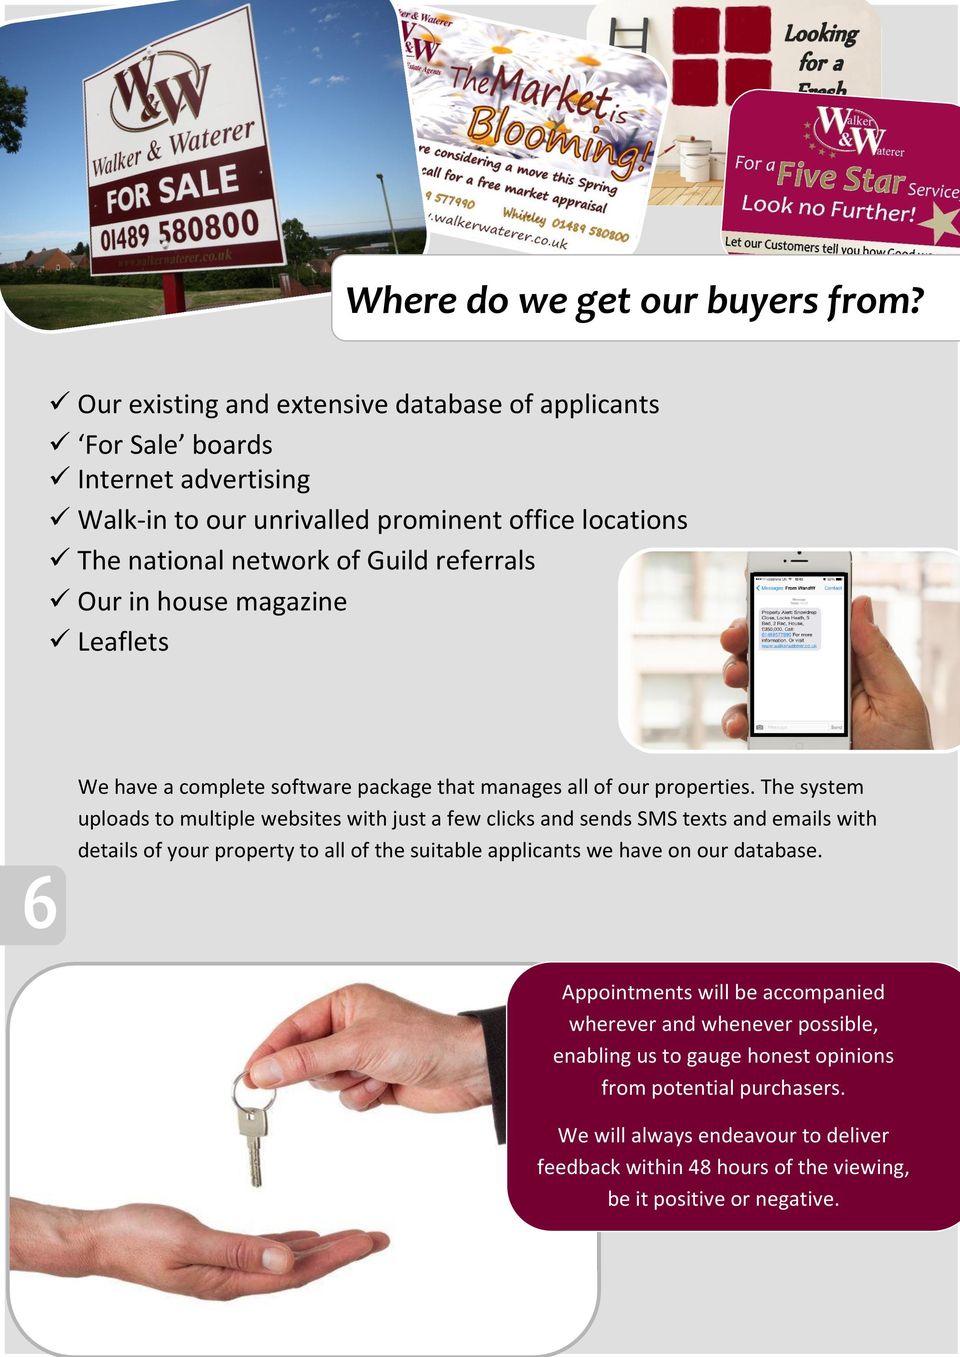 Our in house magazine Leaflets We have a complete software package that manages all of our properties.